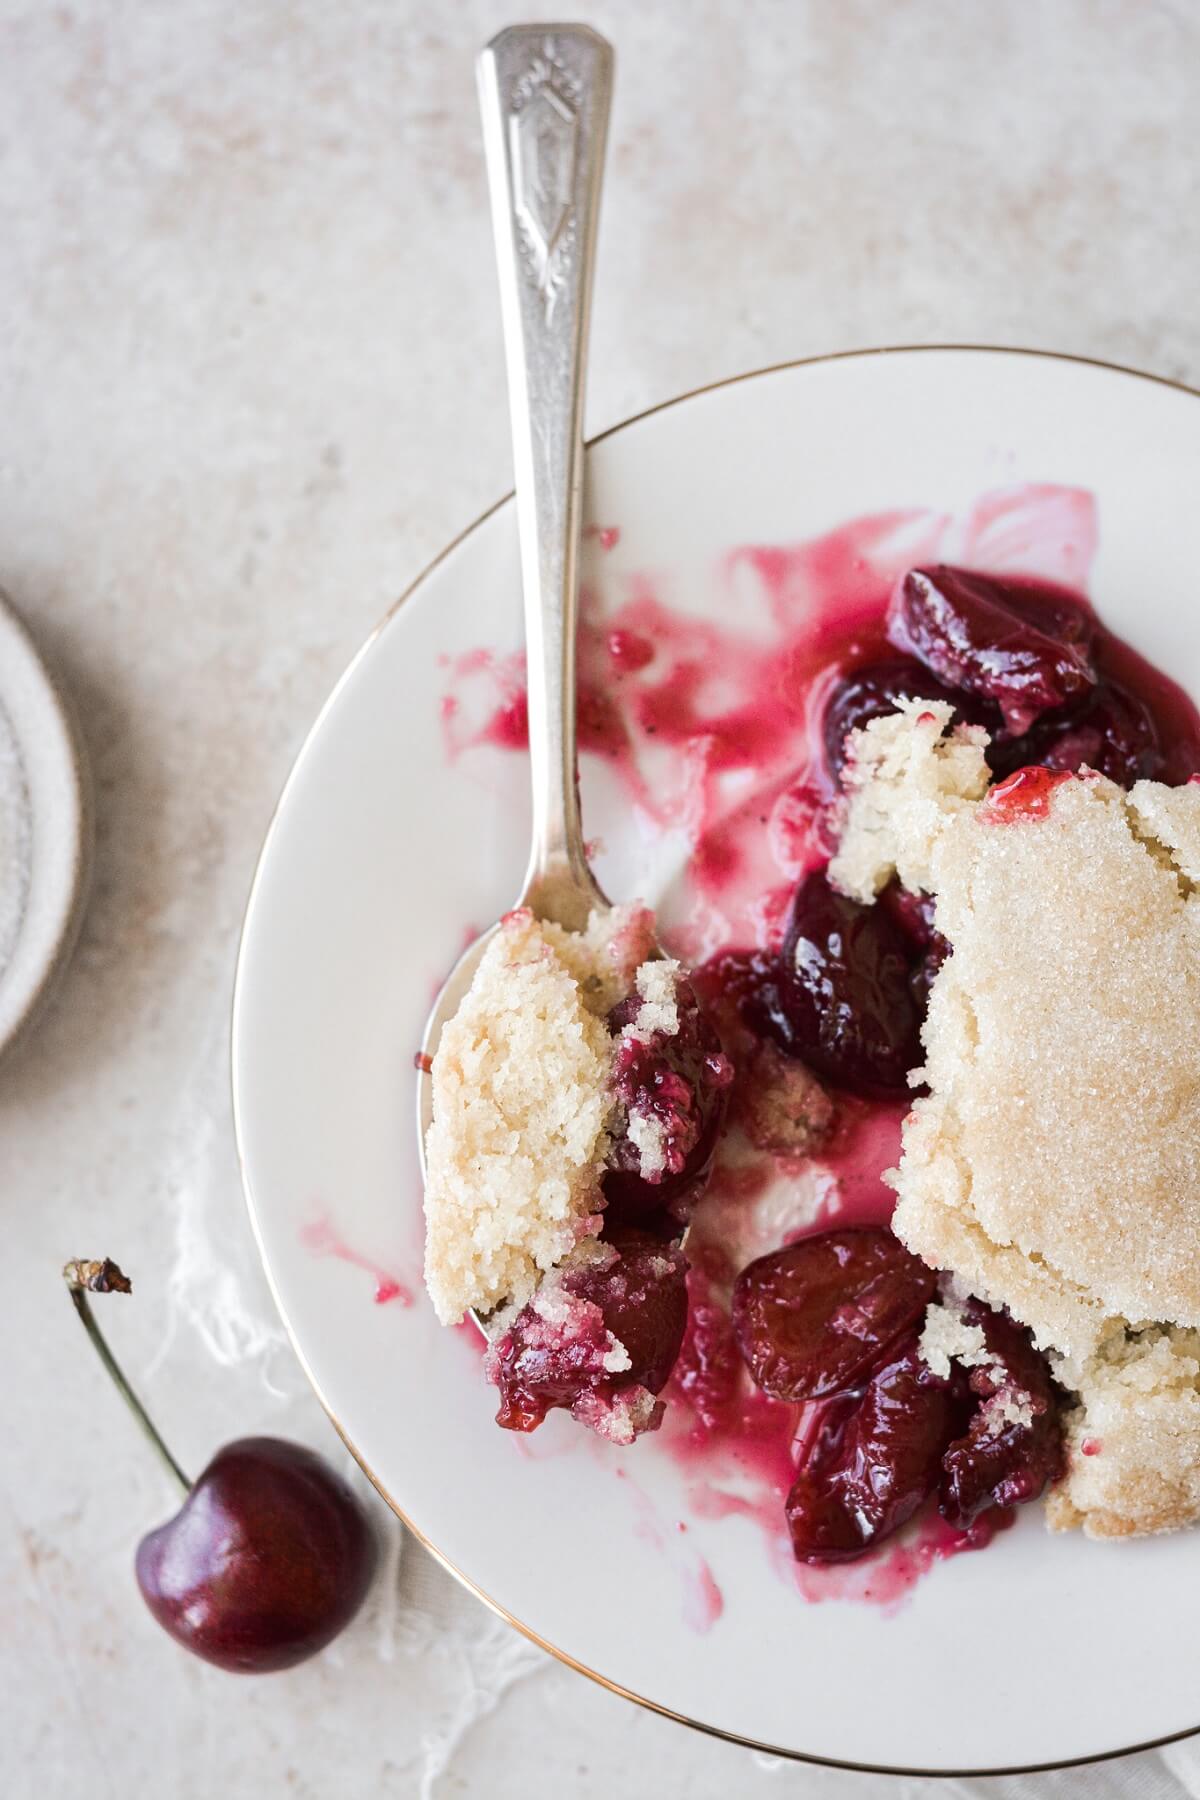 A spoonful of cherry cobbler.